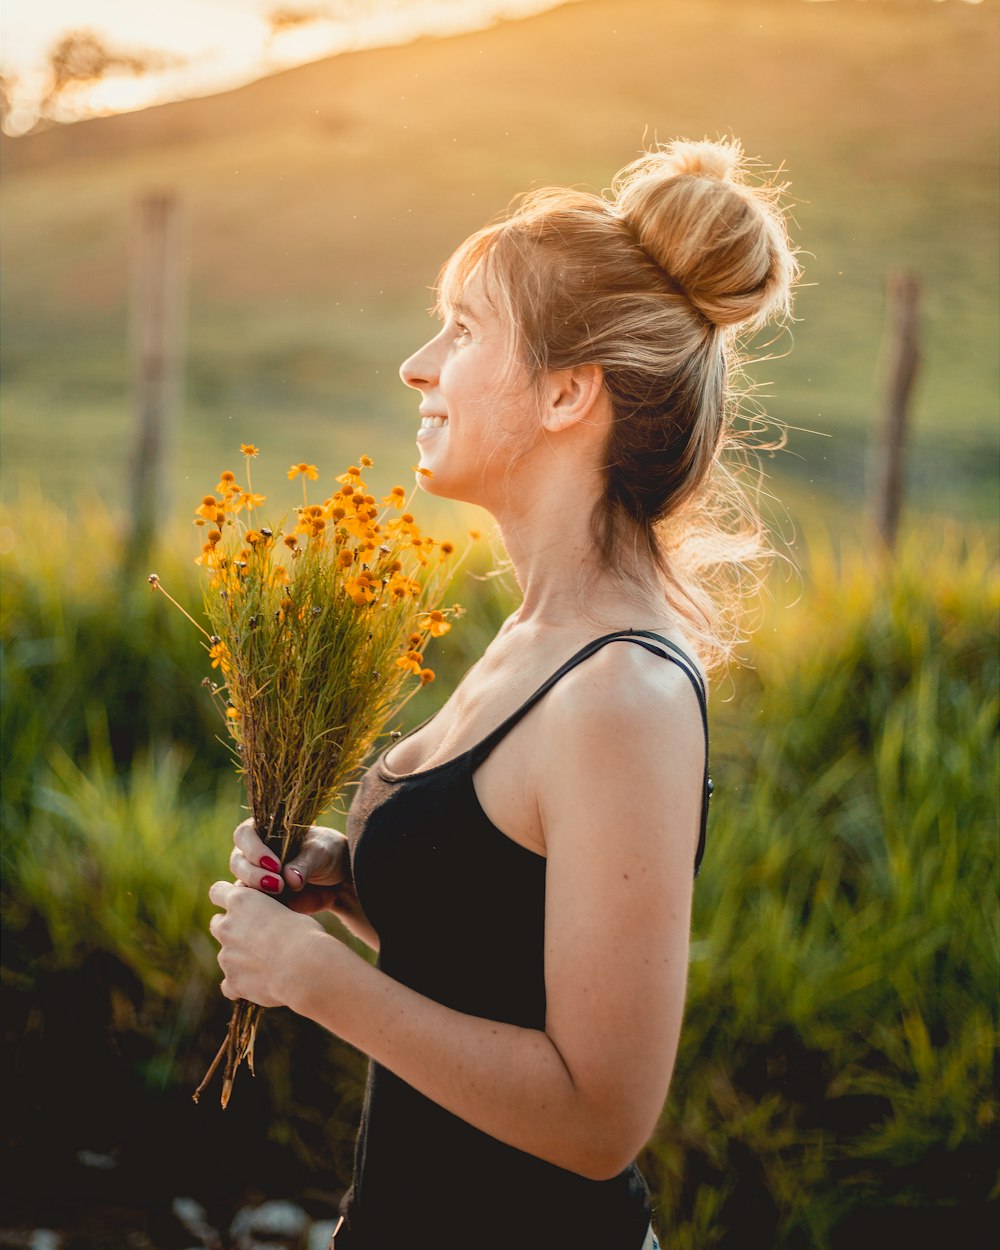 woman in black spaghetti strap top holding yellow flowers outdoors